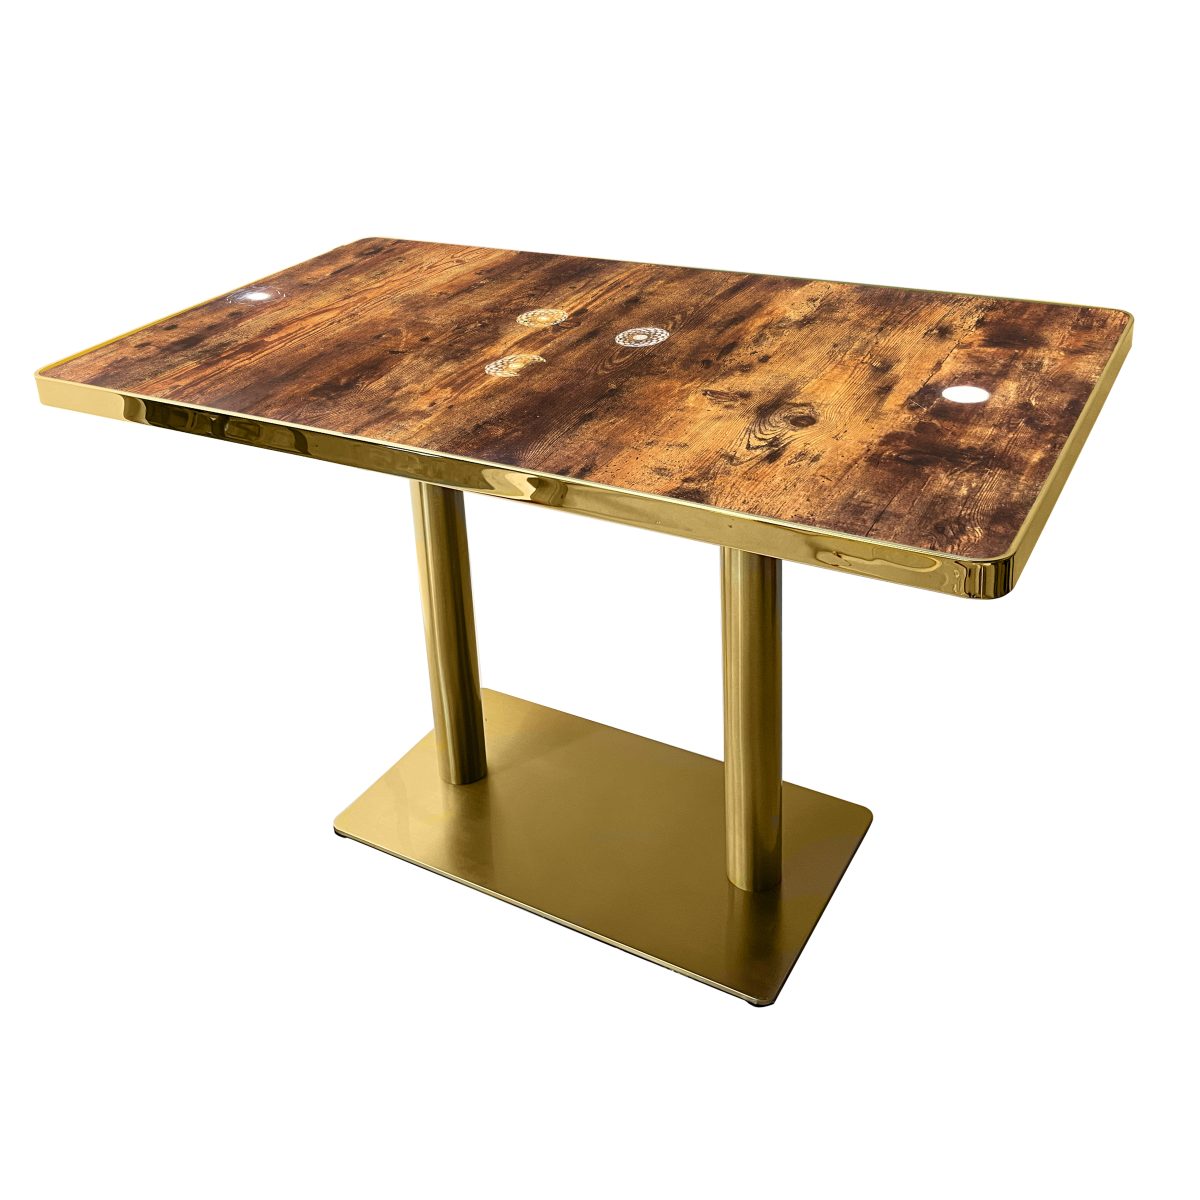 Dark Old Oak Tabletop With Gold Cast Iron Legs